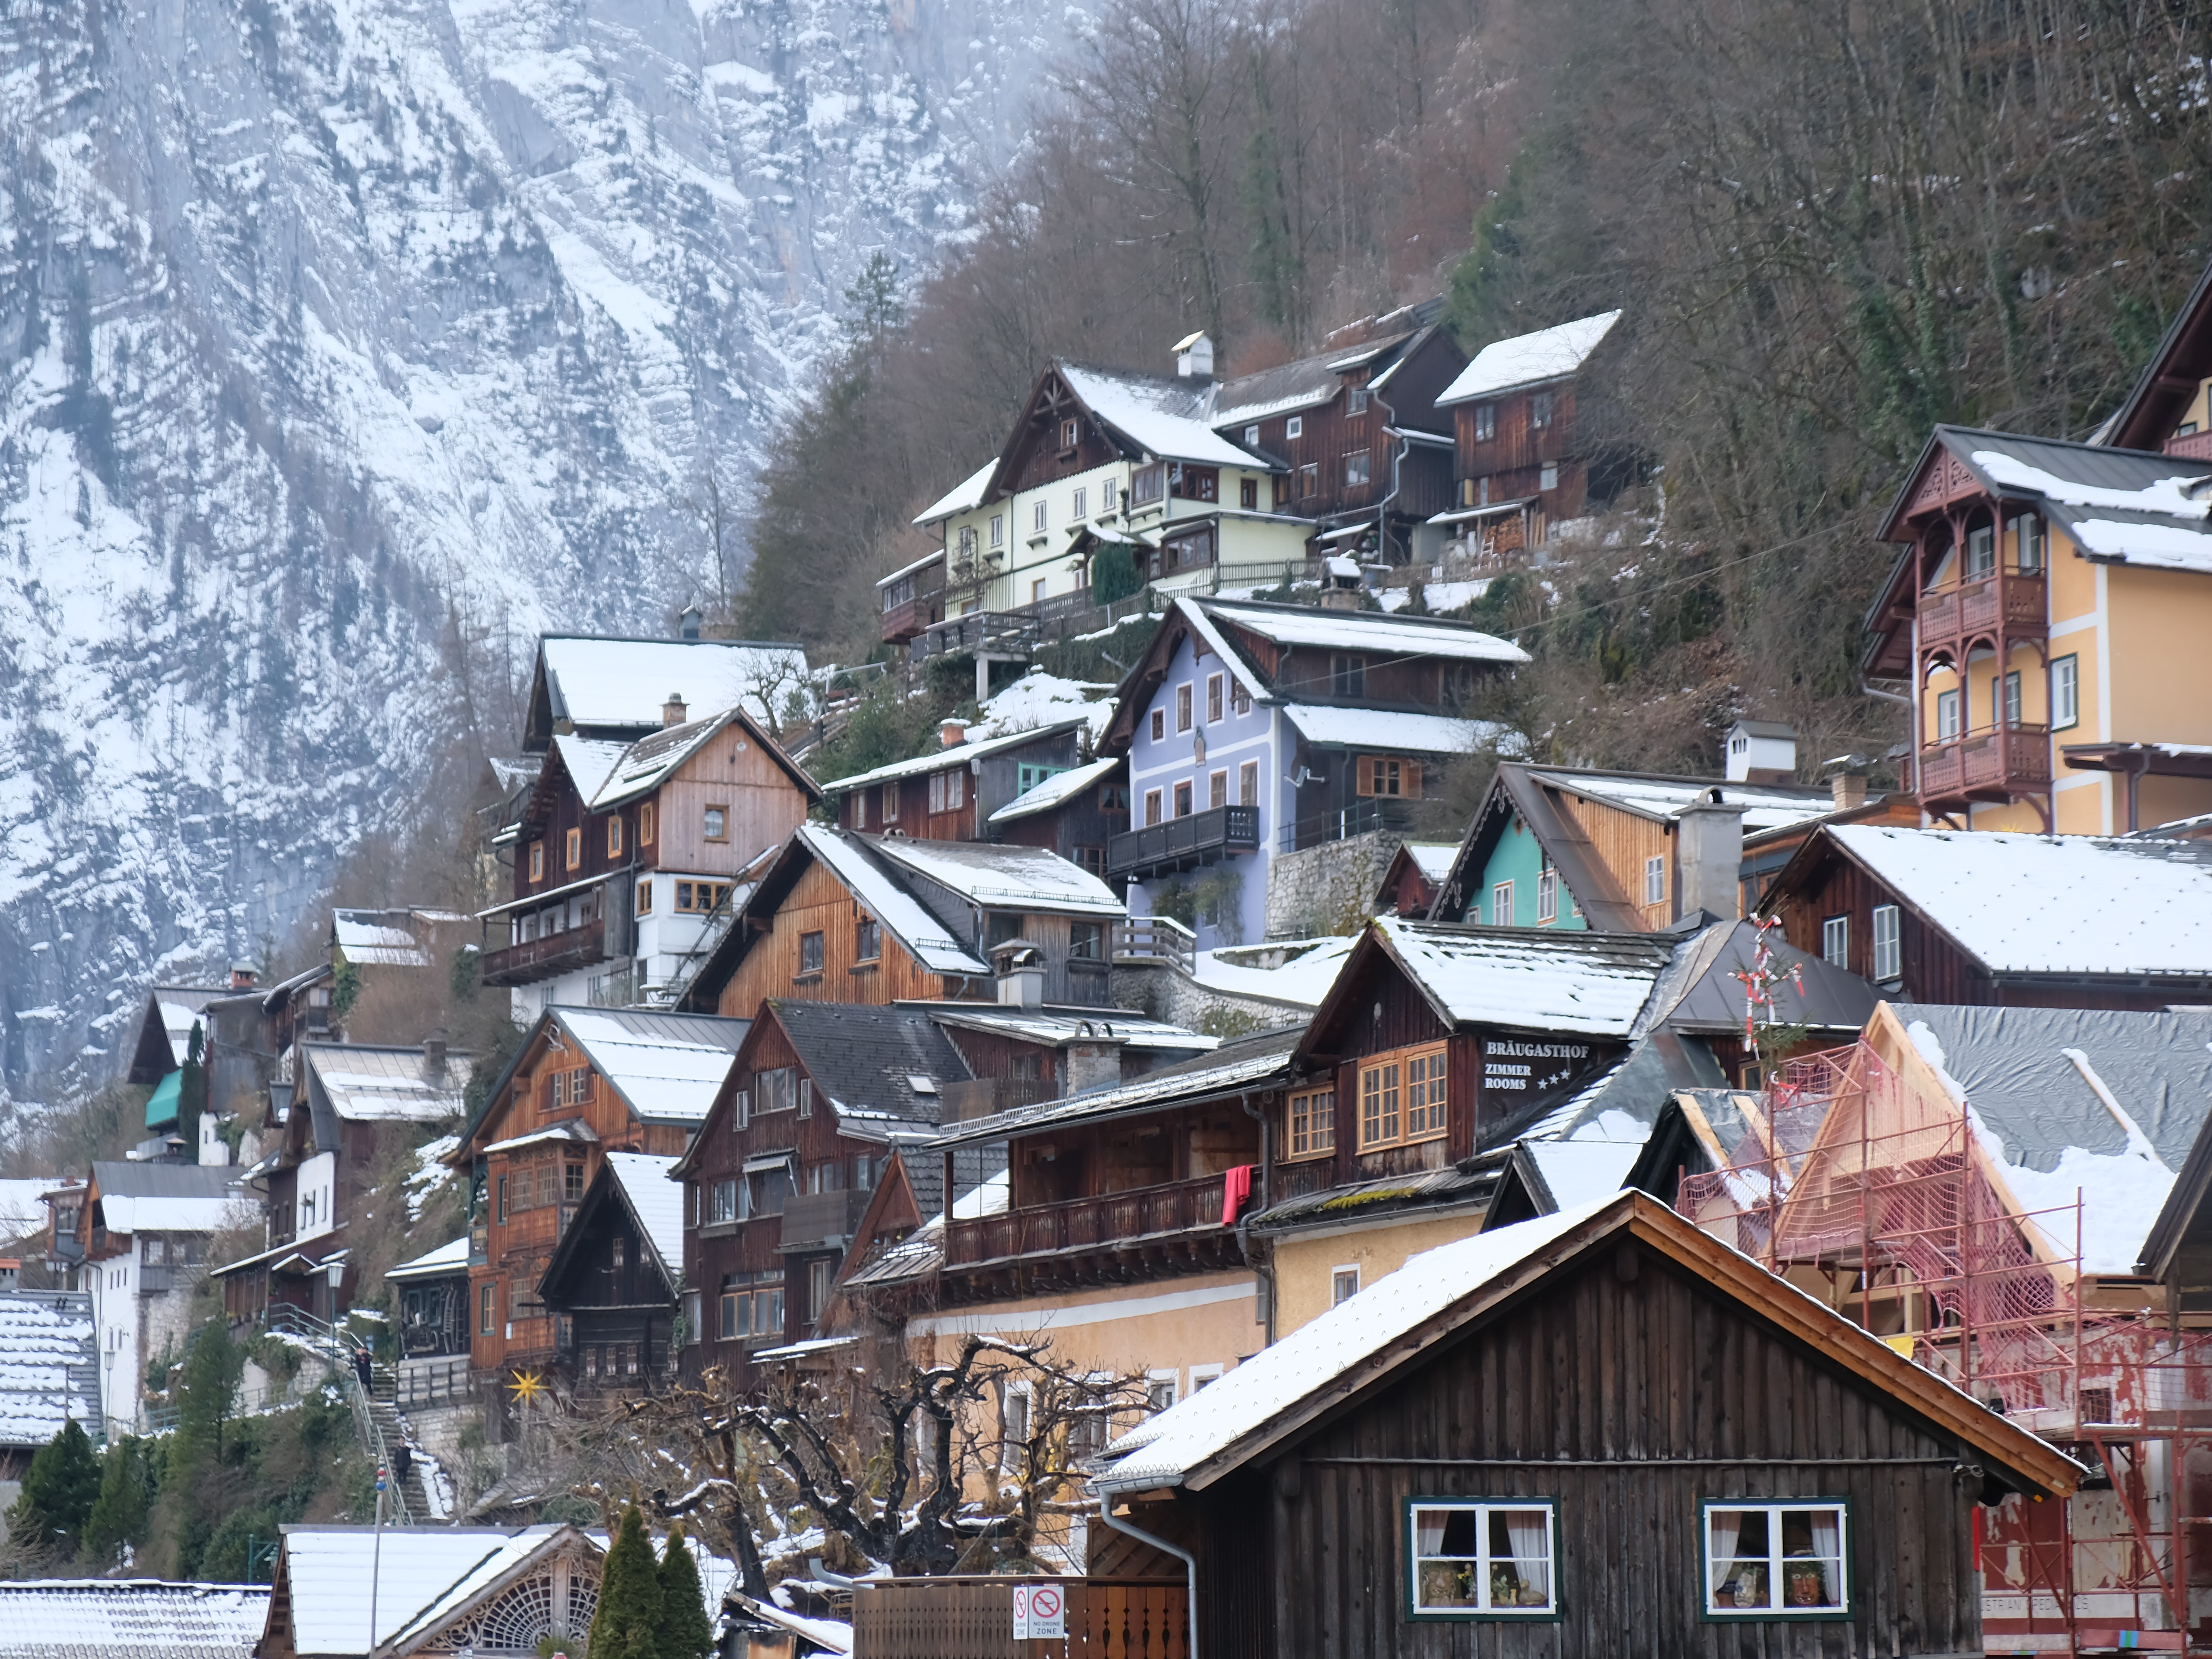 Step Back in Time: Escape to the Fairytale Village of Hallstatt, Austria, from Bustling Munich